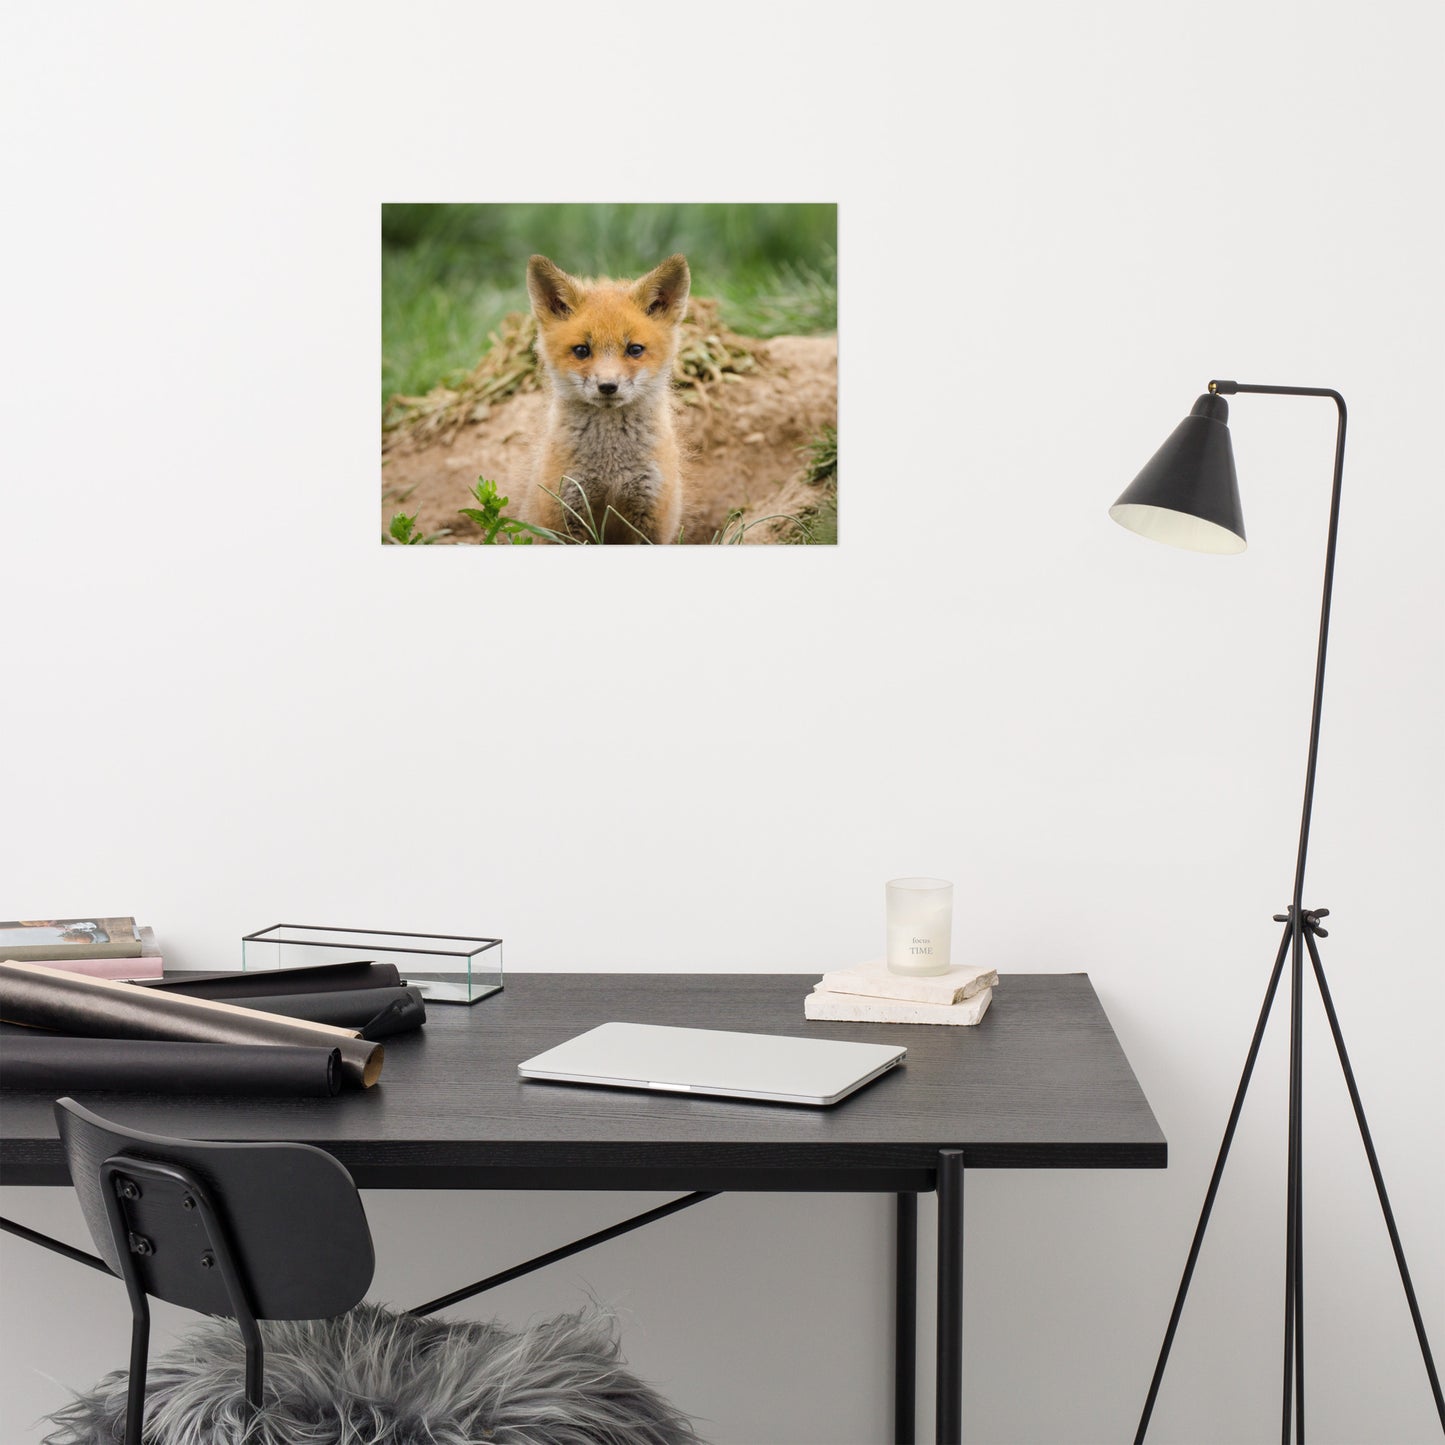 Bathroom Wall Hanging Pictures: Young Red Fox Kit - Animal / Wildlife / Nature Photograph Loose / Unframed / Frameless / Frameable Wall Art Print / Artwork